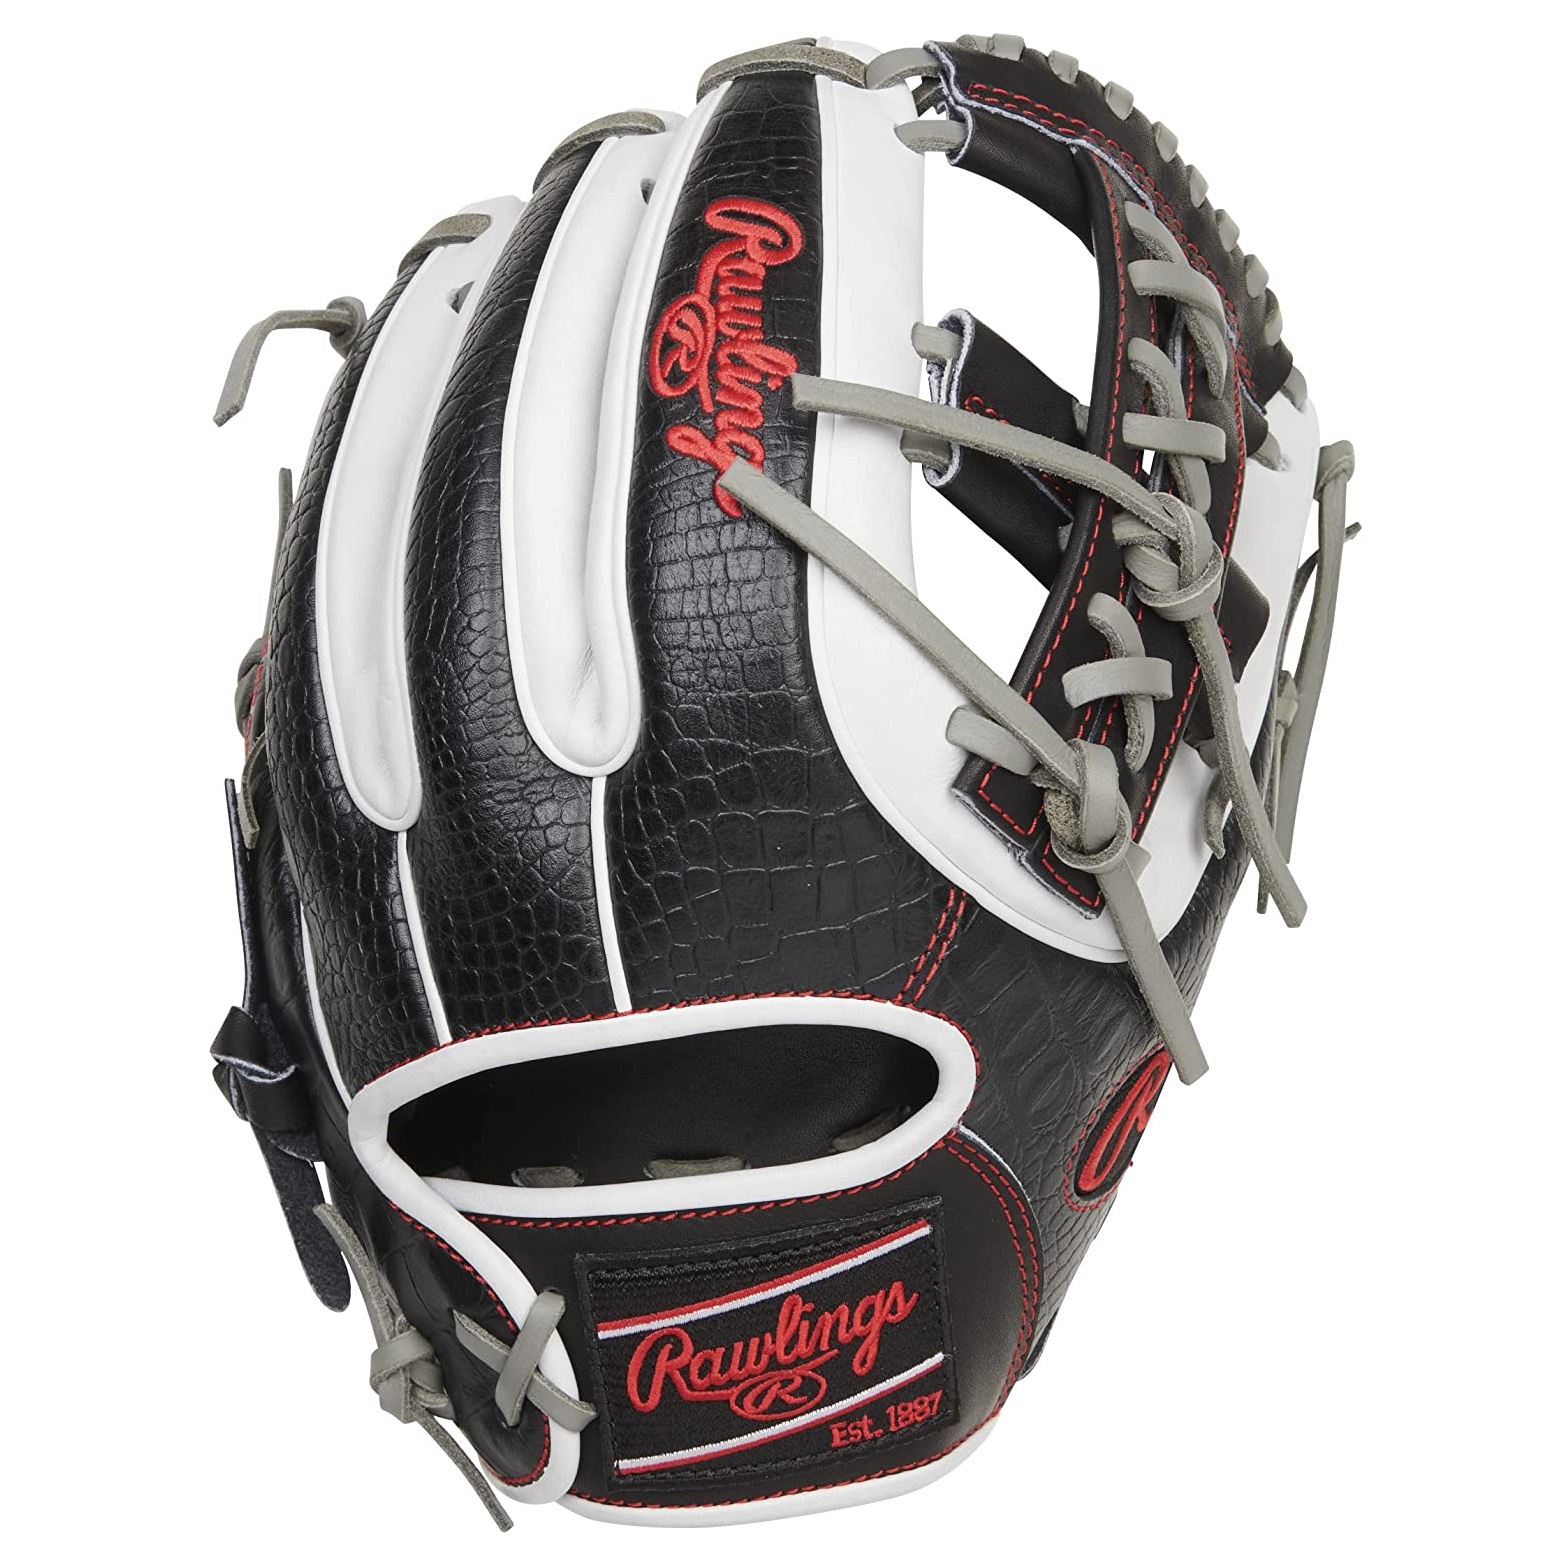 rawlings-heart-of-the-hide-11-5-inch-baseball-glove-split-sinlge-post-web-right-hand-throw PRO314-32BW-RightHandThrow Rawlings            The